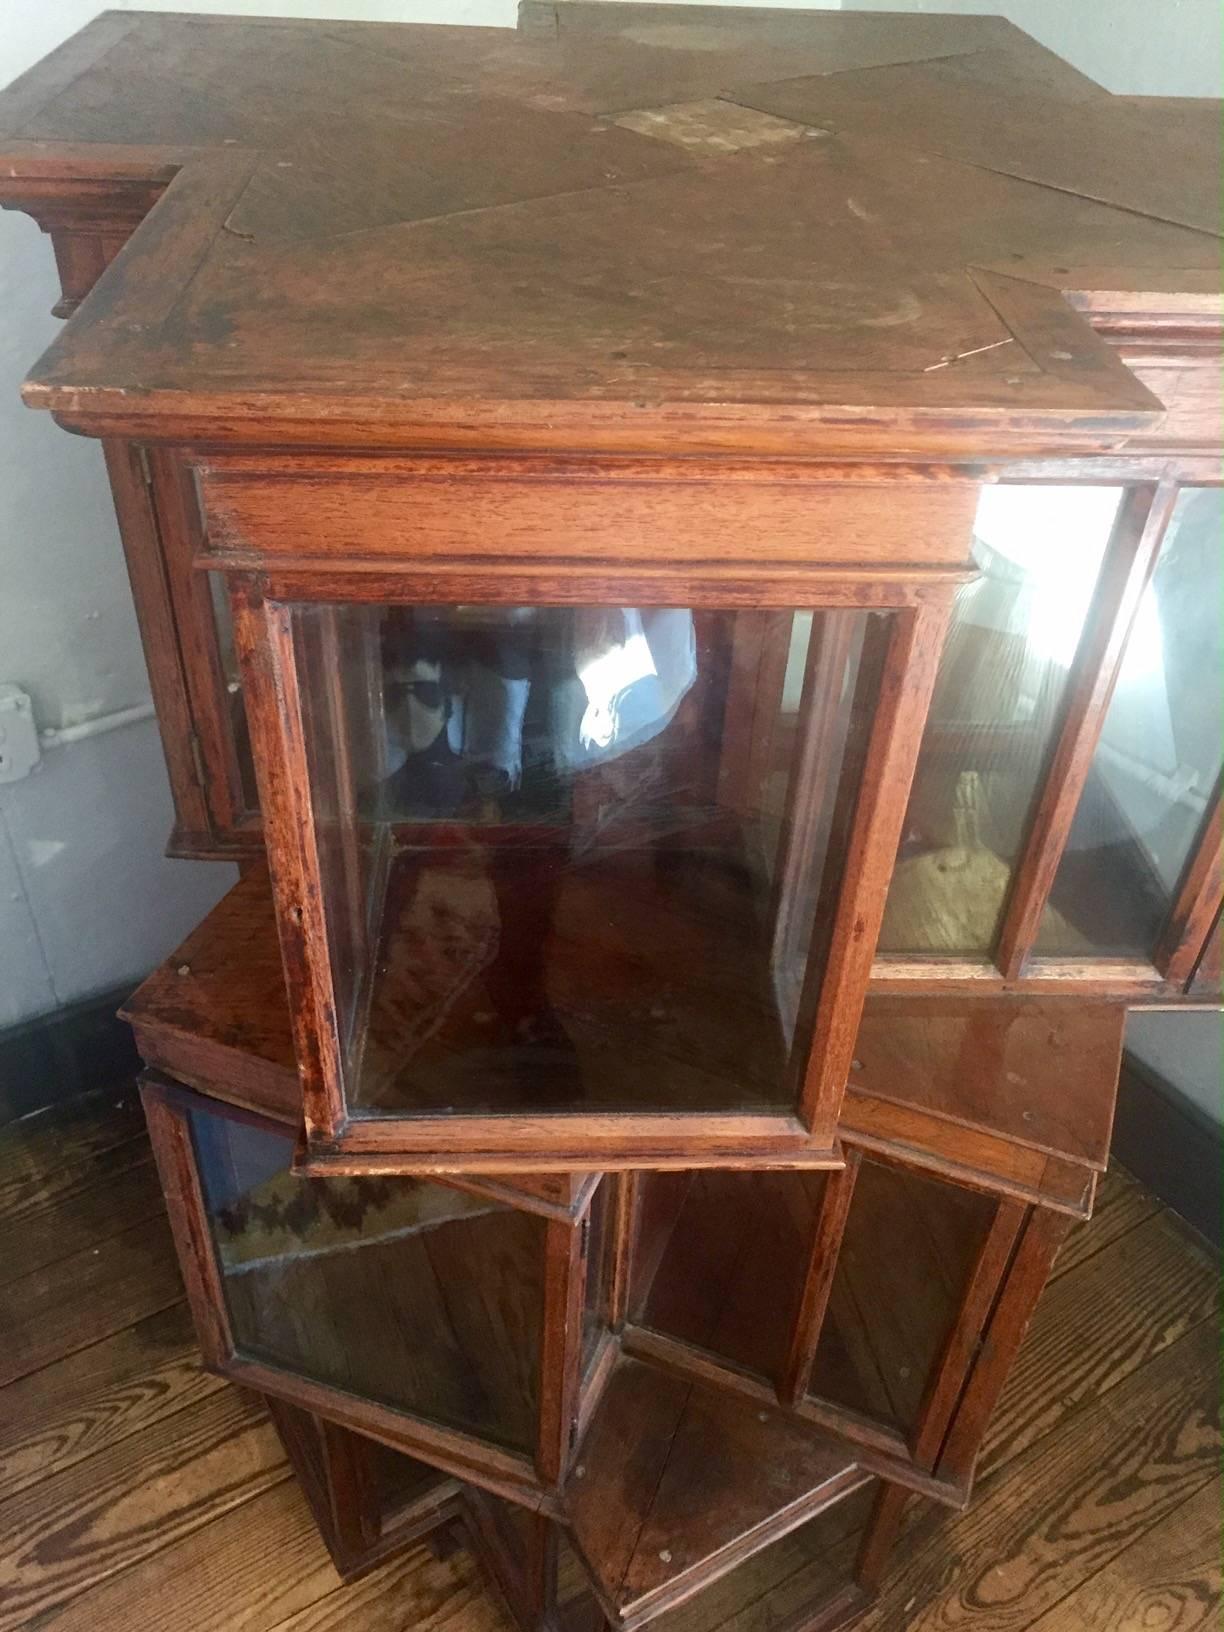 19th Century Very Unusual Antique Revolving Wood and Glass Bibliophile